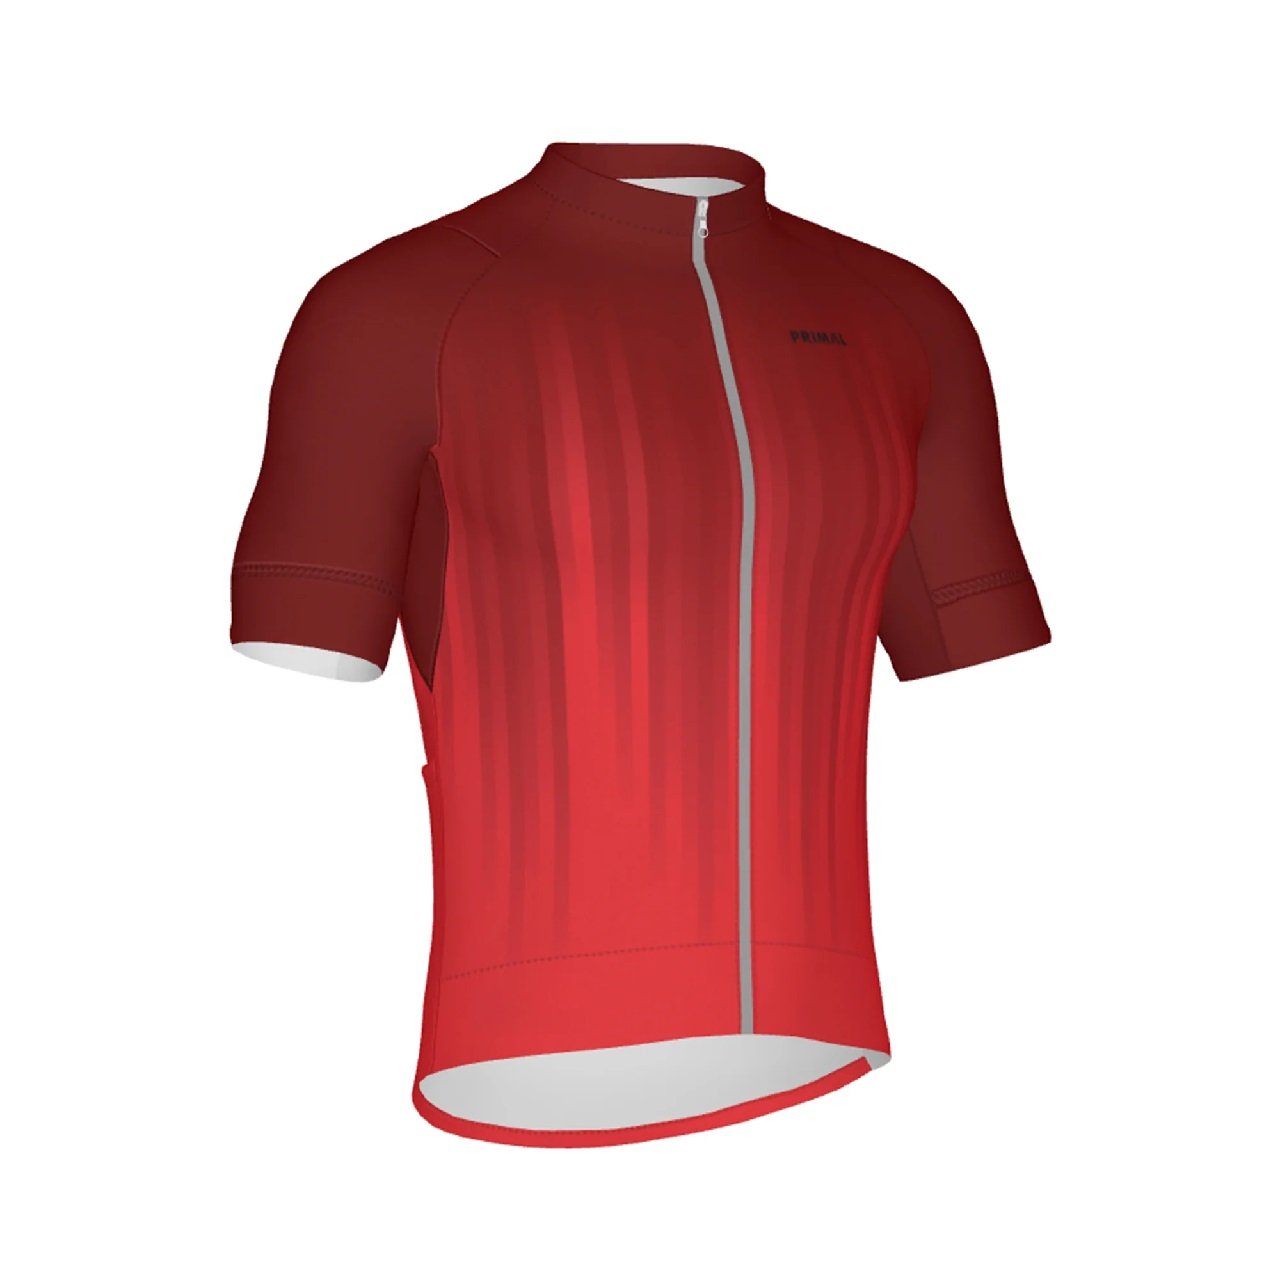 Hypersonic Red Men's Equinox Cycling Jersey by Primal